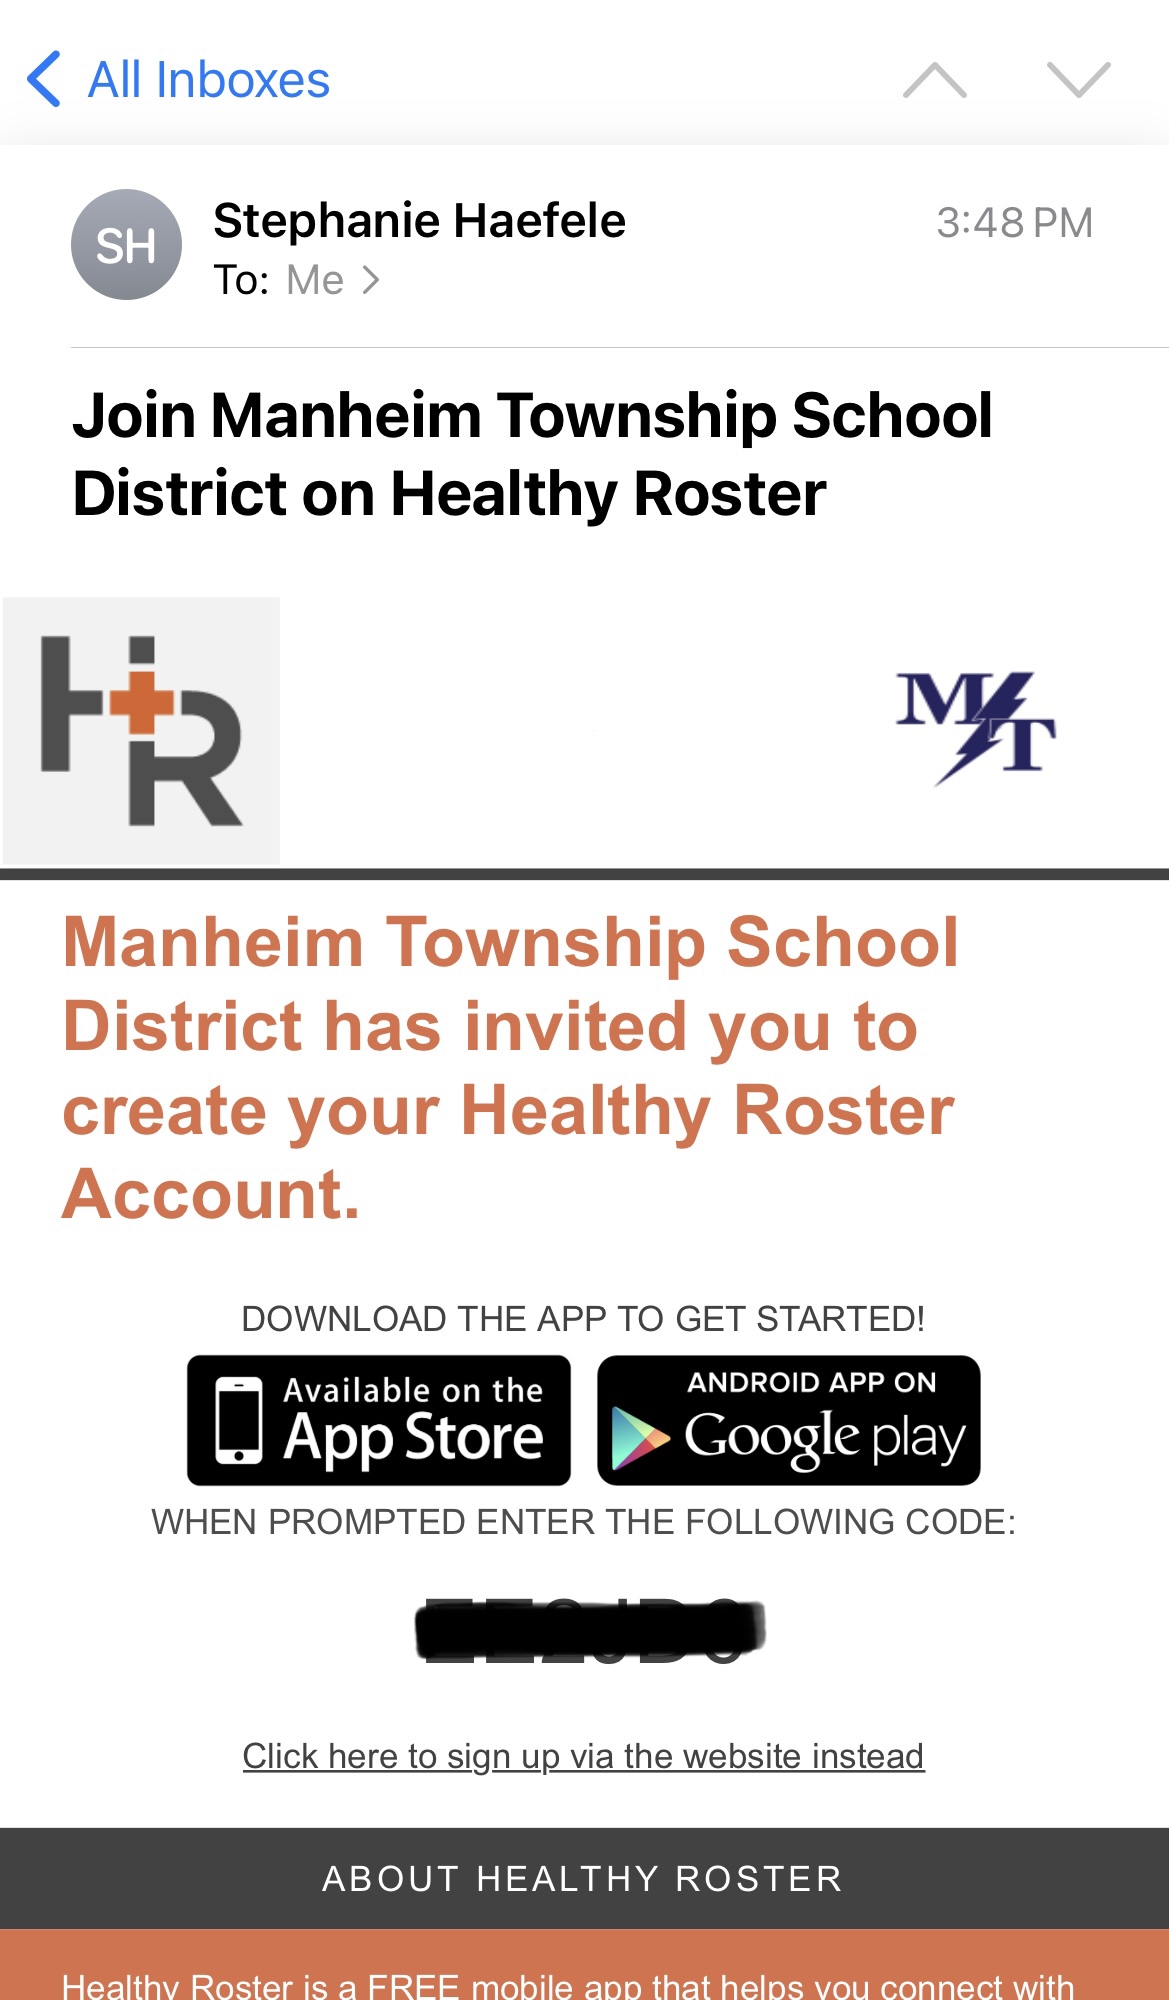 screenshot of email from Healthy Roster. From Stephanie Haefele, timestamp 3:48pm. Subject: Join Manheim Township School District on Healthy Roster. Body: Manheim Township School District has invited you to create your Healthy Roster Account. Download the app to get started! When prompted enter the following code (code is obscured).